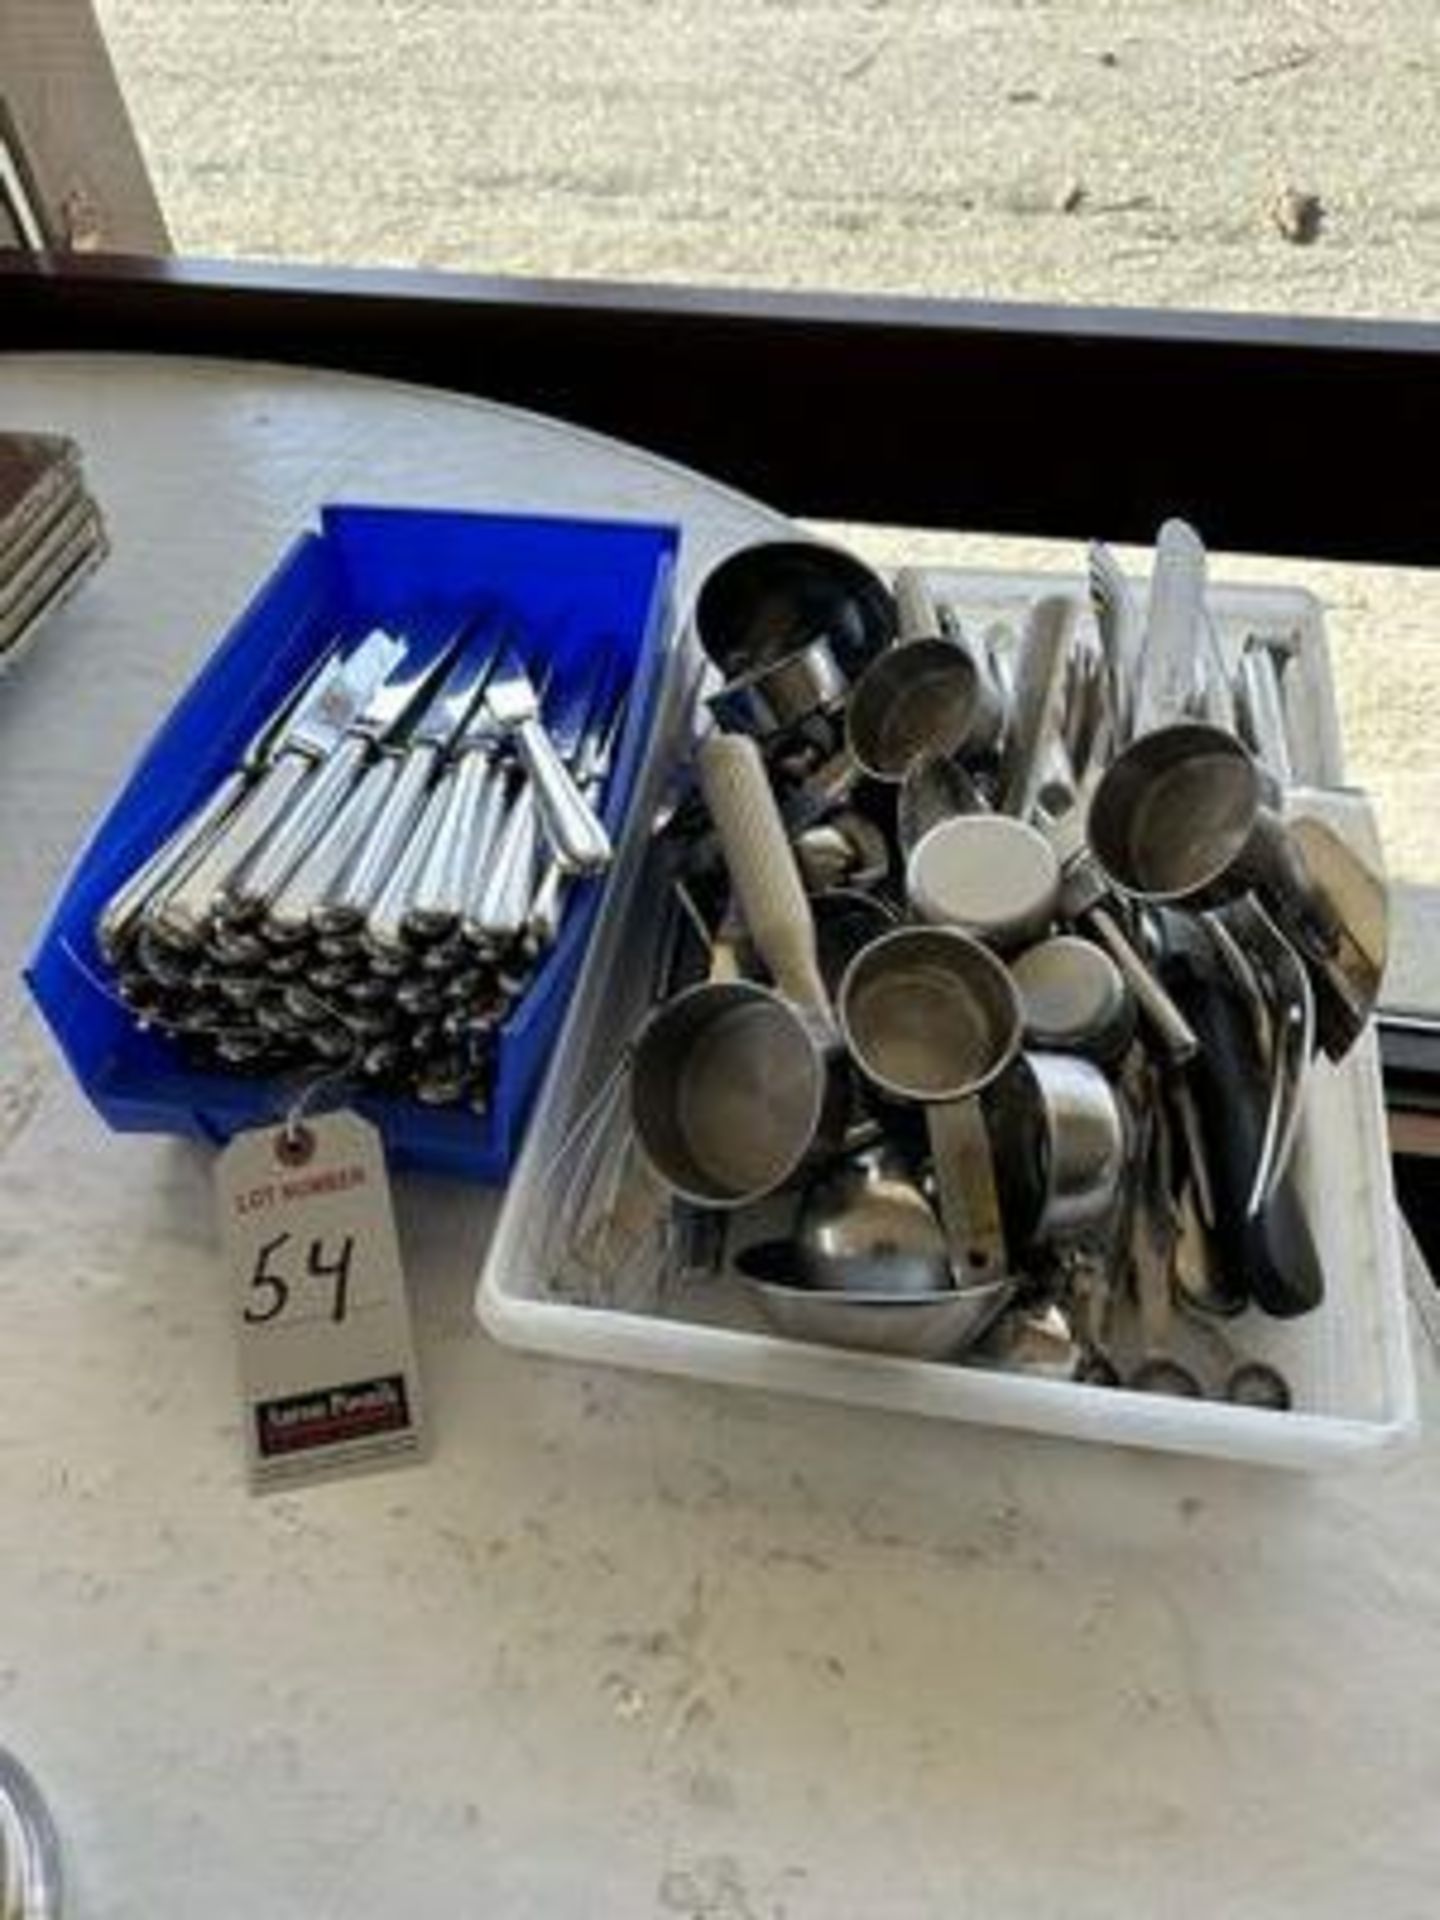 LOT OF ASS'T KNIVES, TONGS, WHISKS, ETC.